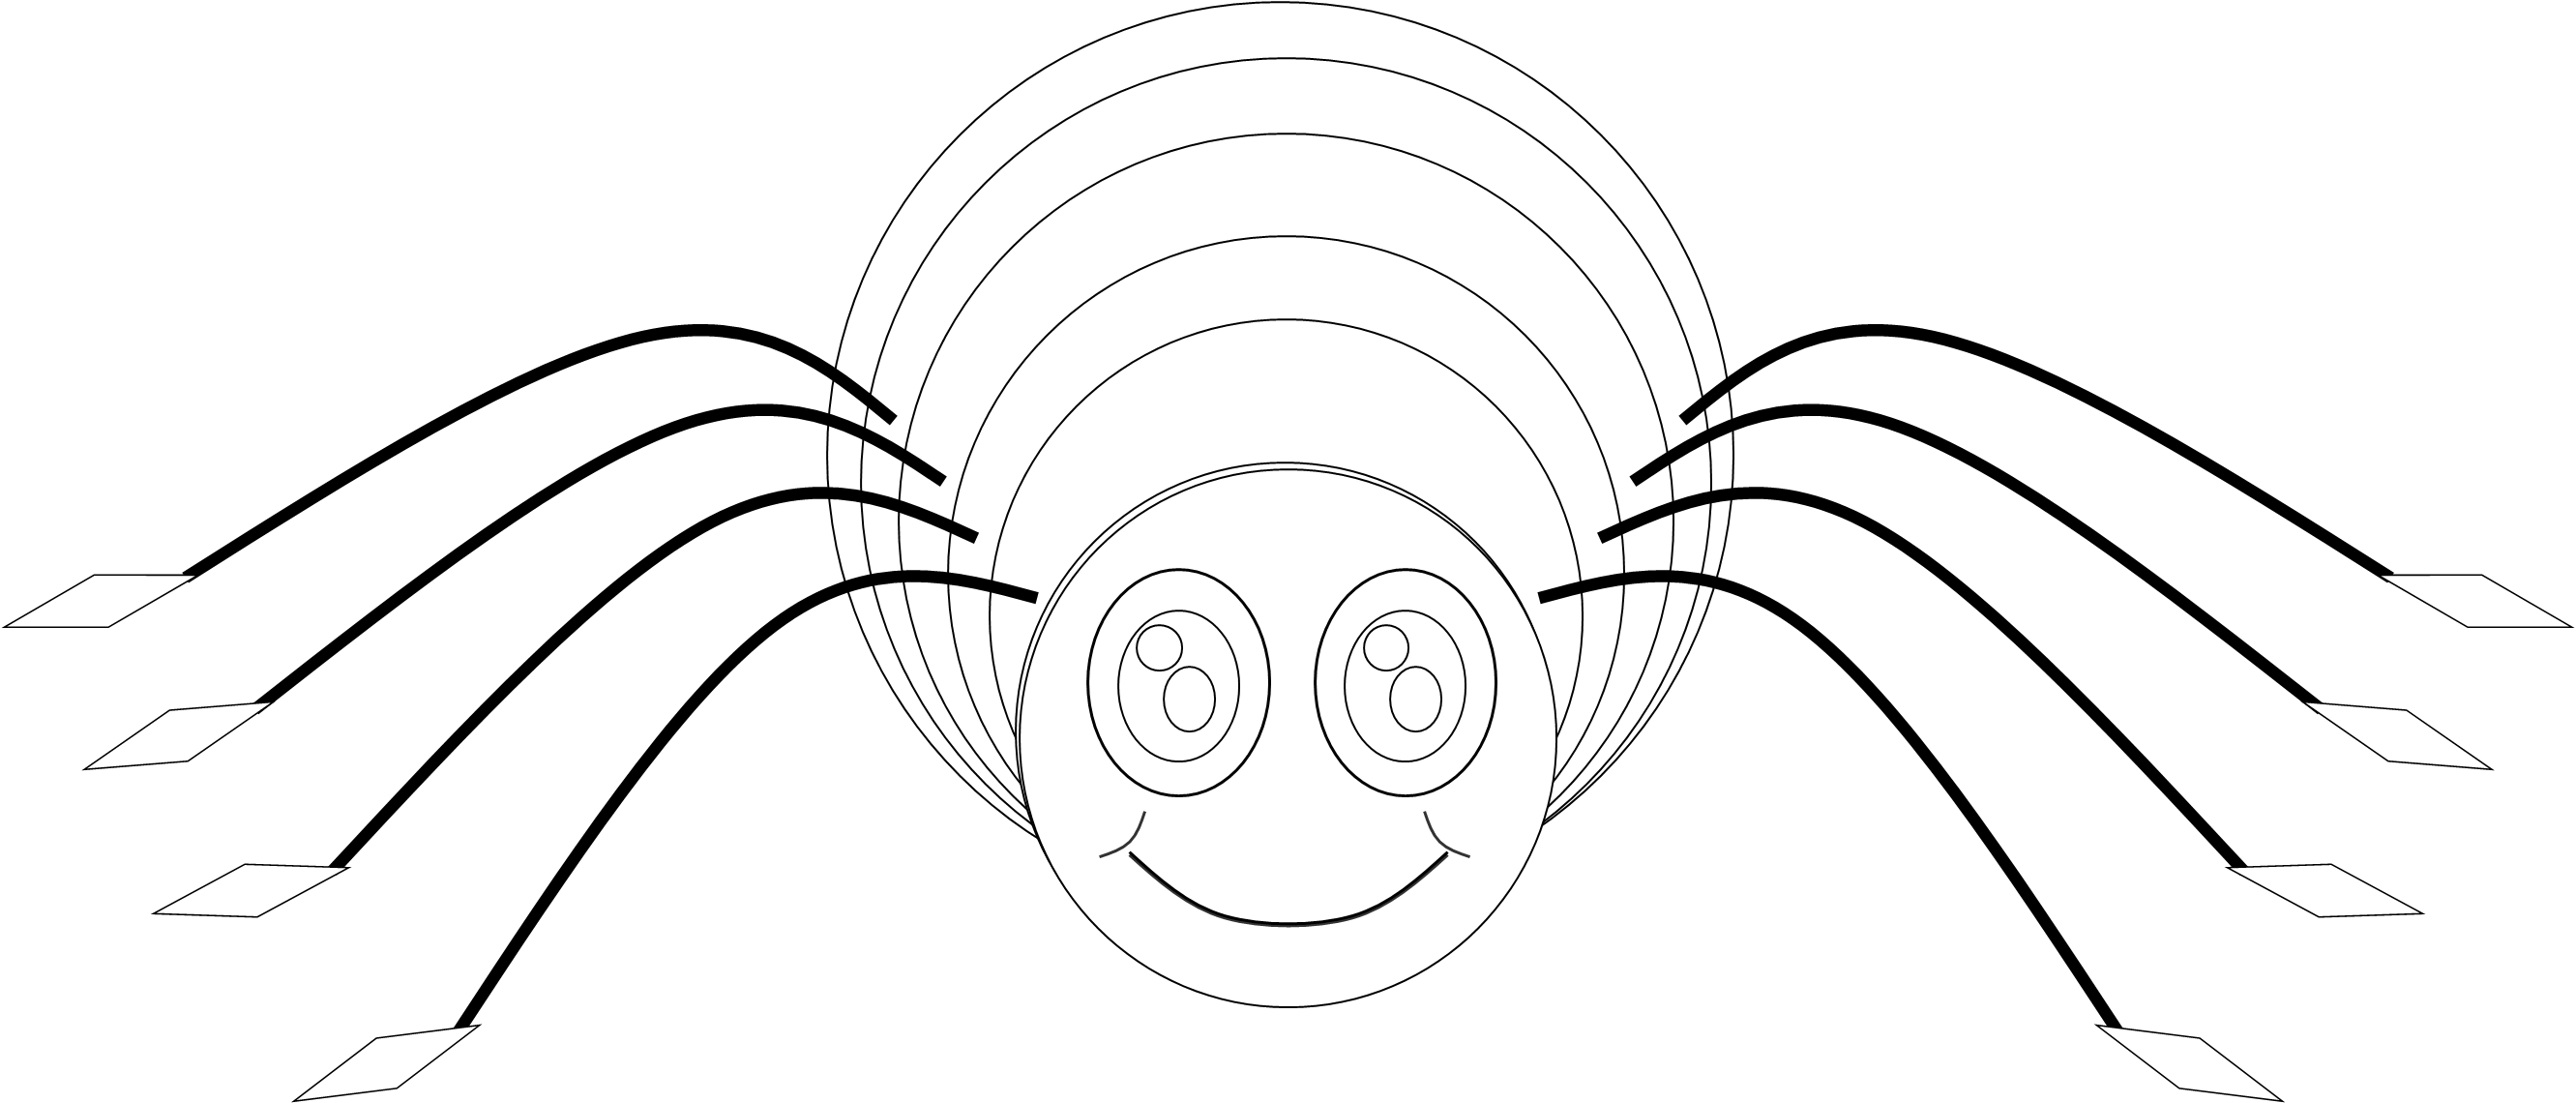 Spider Bw image - vector clip art online, royalty free  public domain